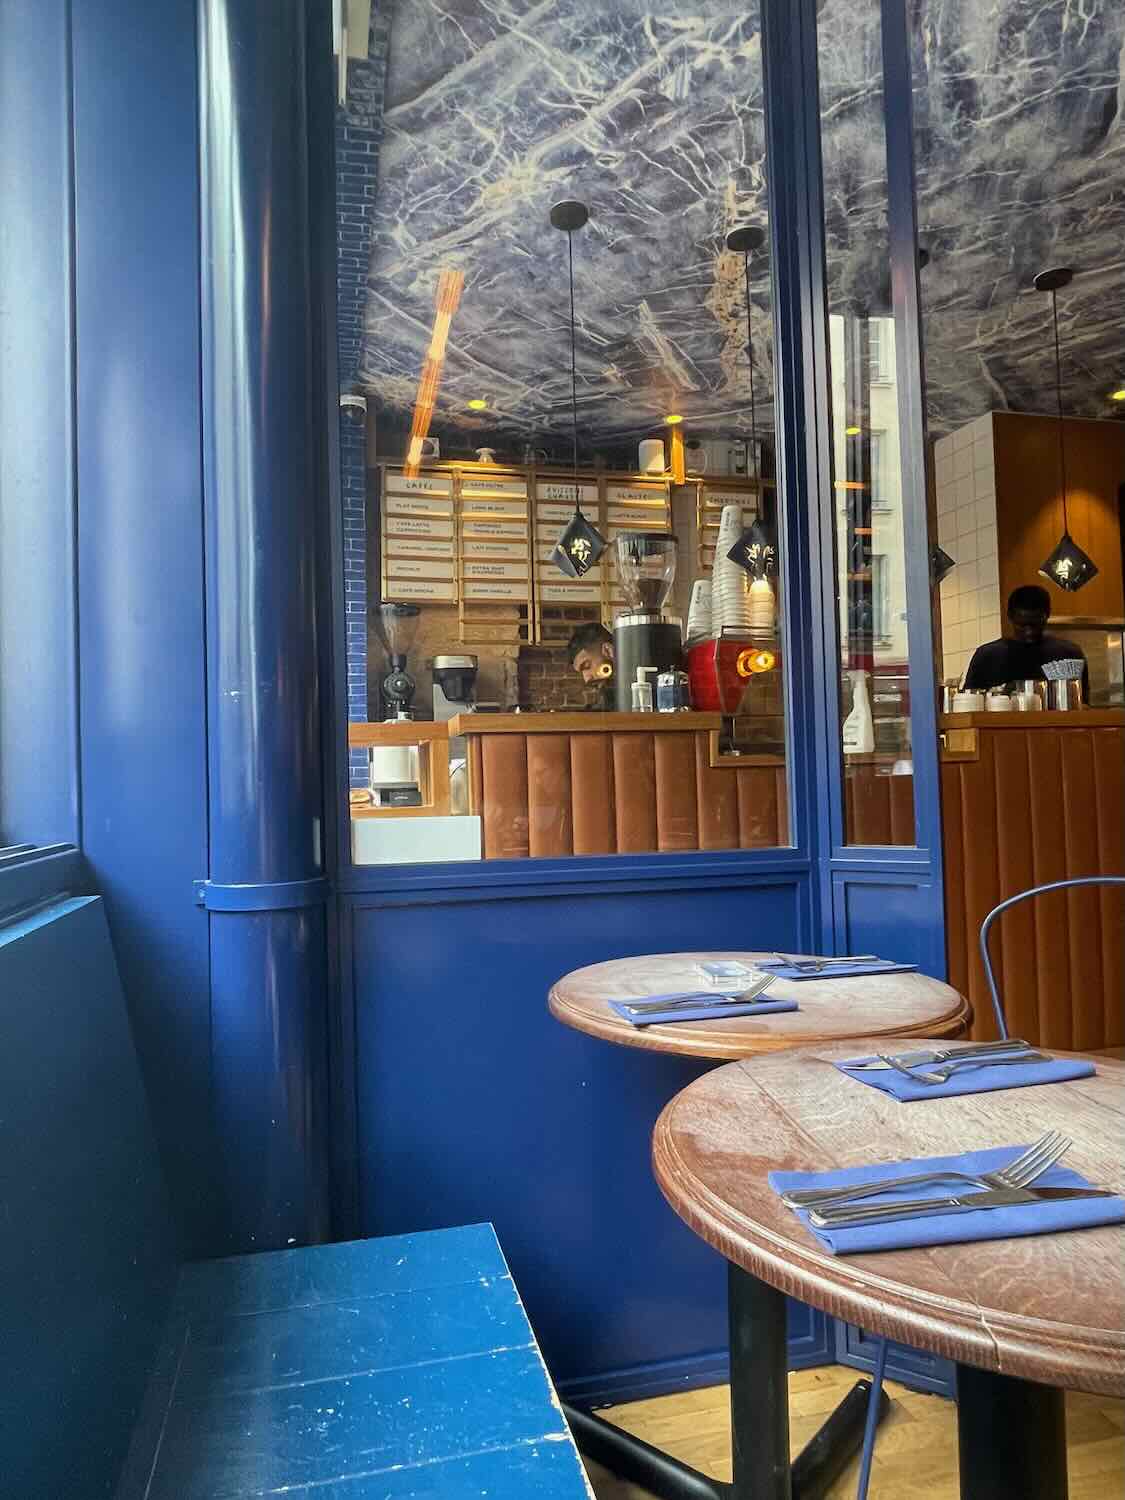 A cozy corner of a Parisian café with vibrant blue decor and wooden tables, offering a welcoming atmosphere for a leisurely coffee break.